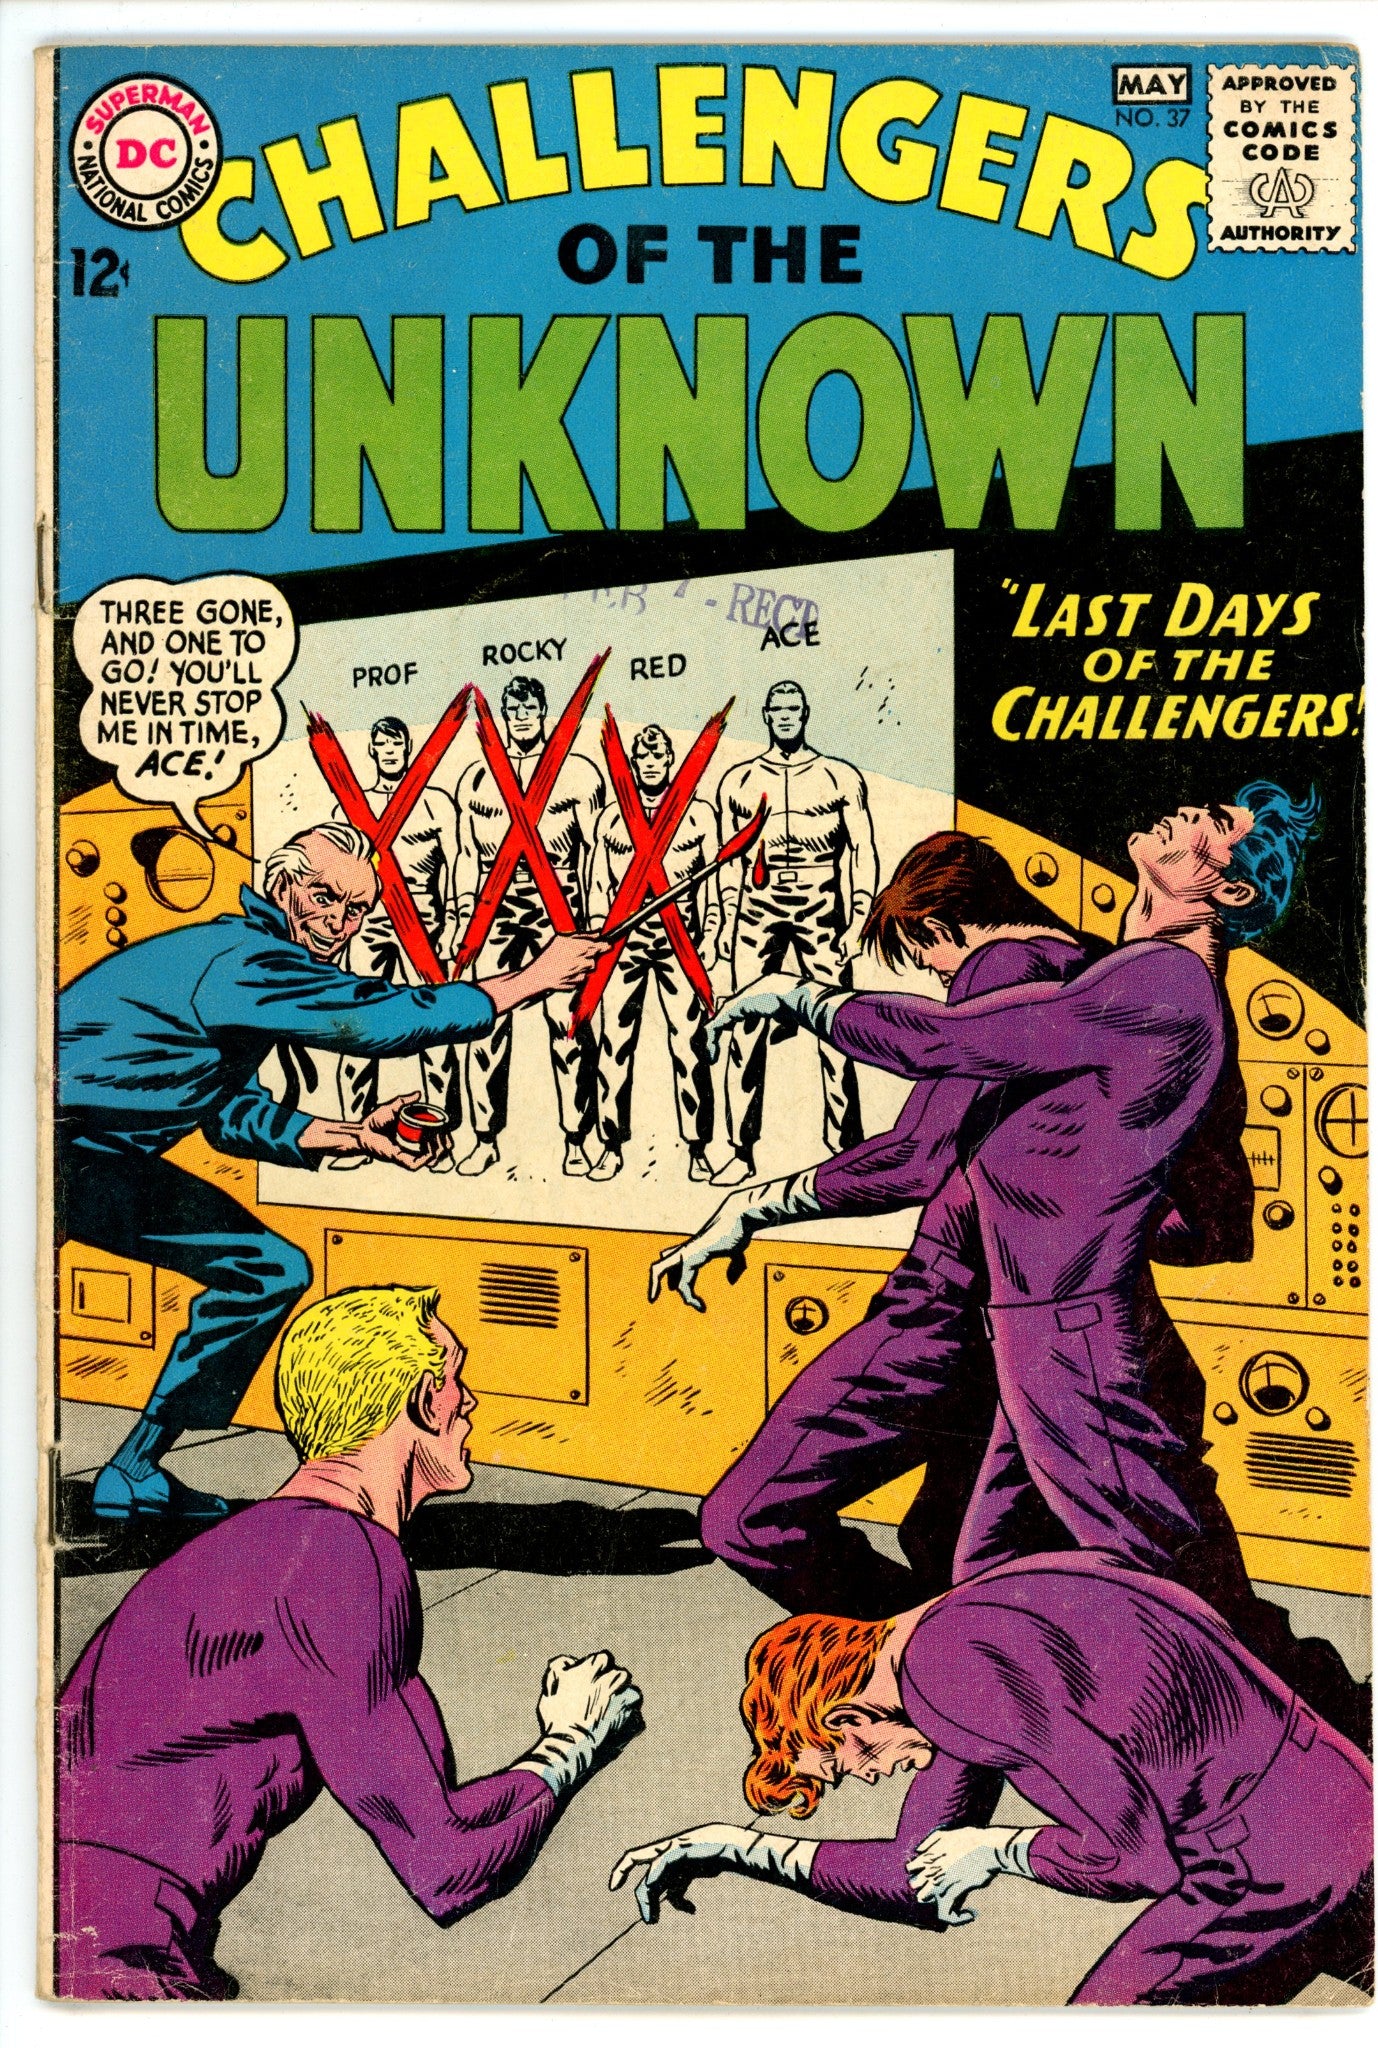 Challengers of the Unknown Vol 1 37 VG+ (4.5) (1964) 